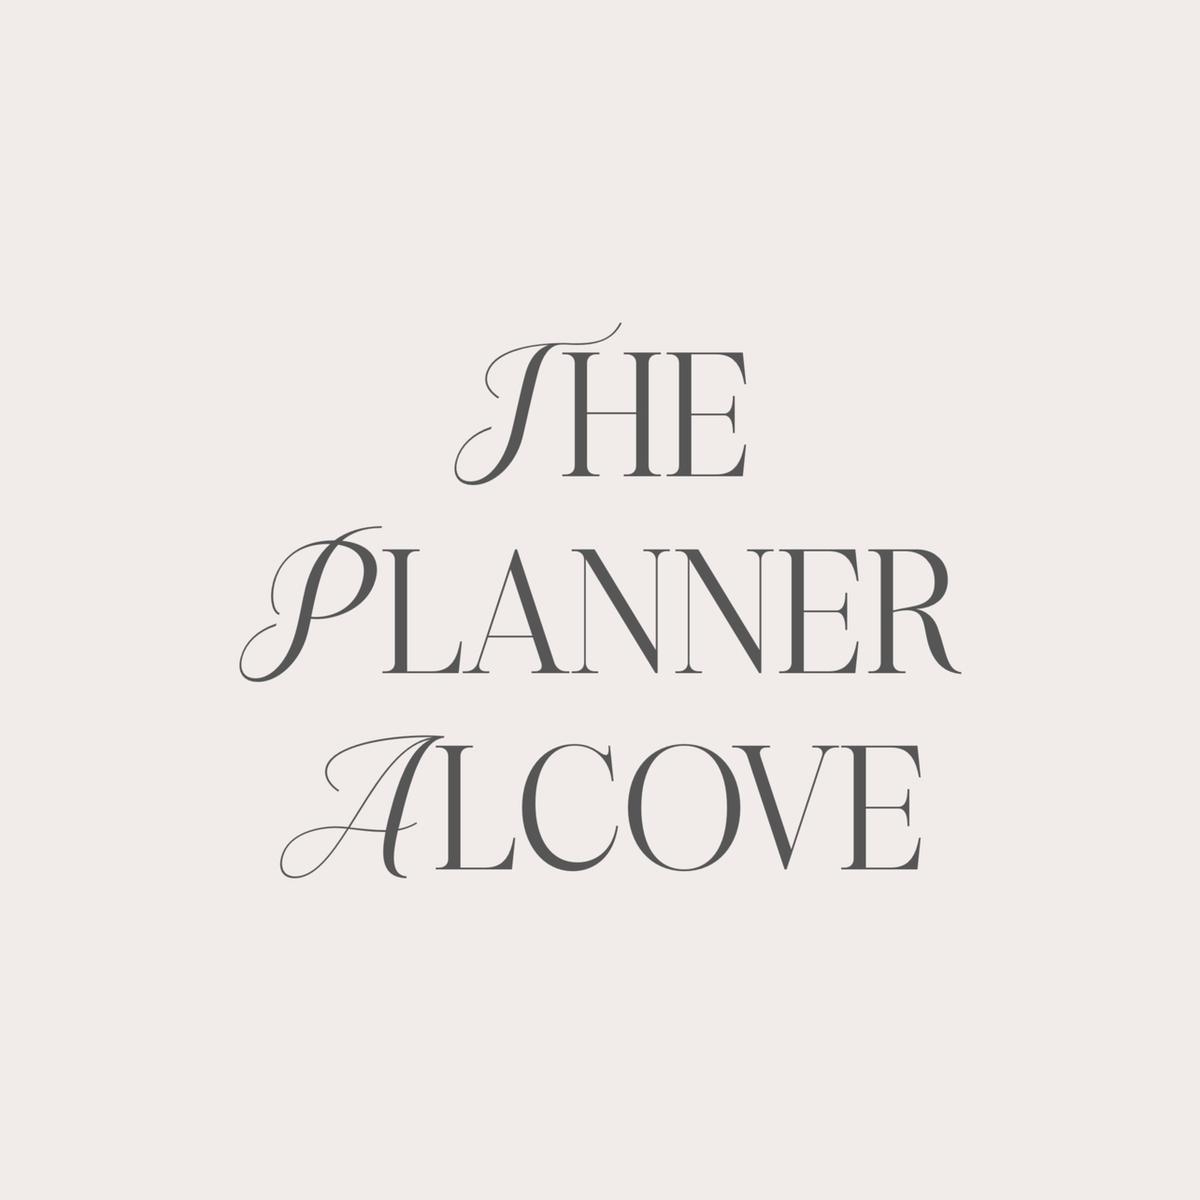 Planner Alcove's images